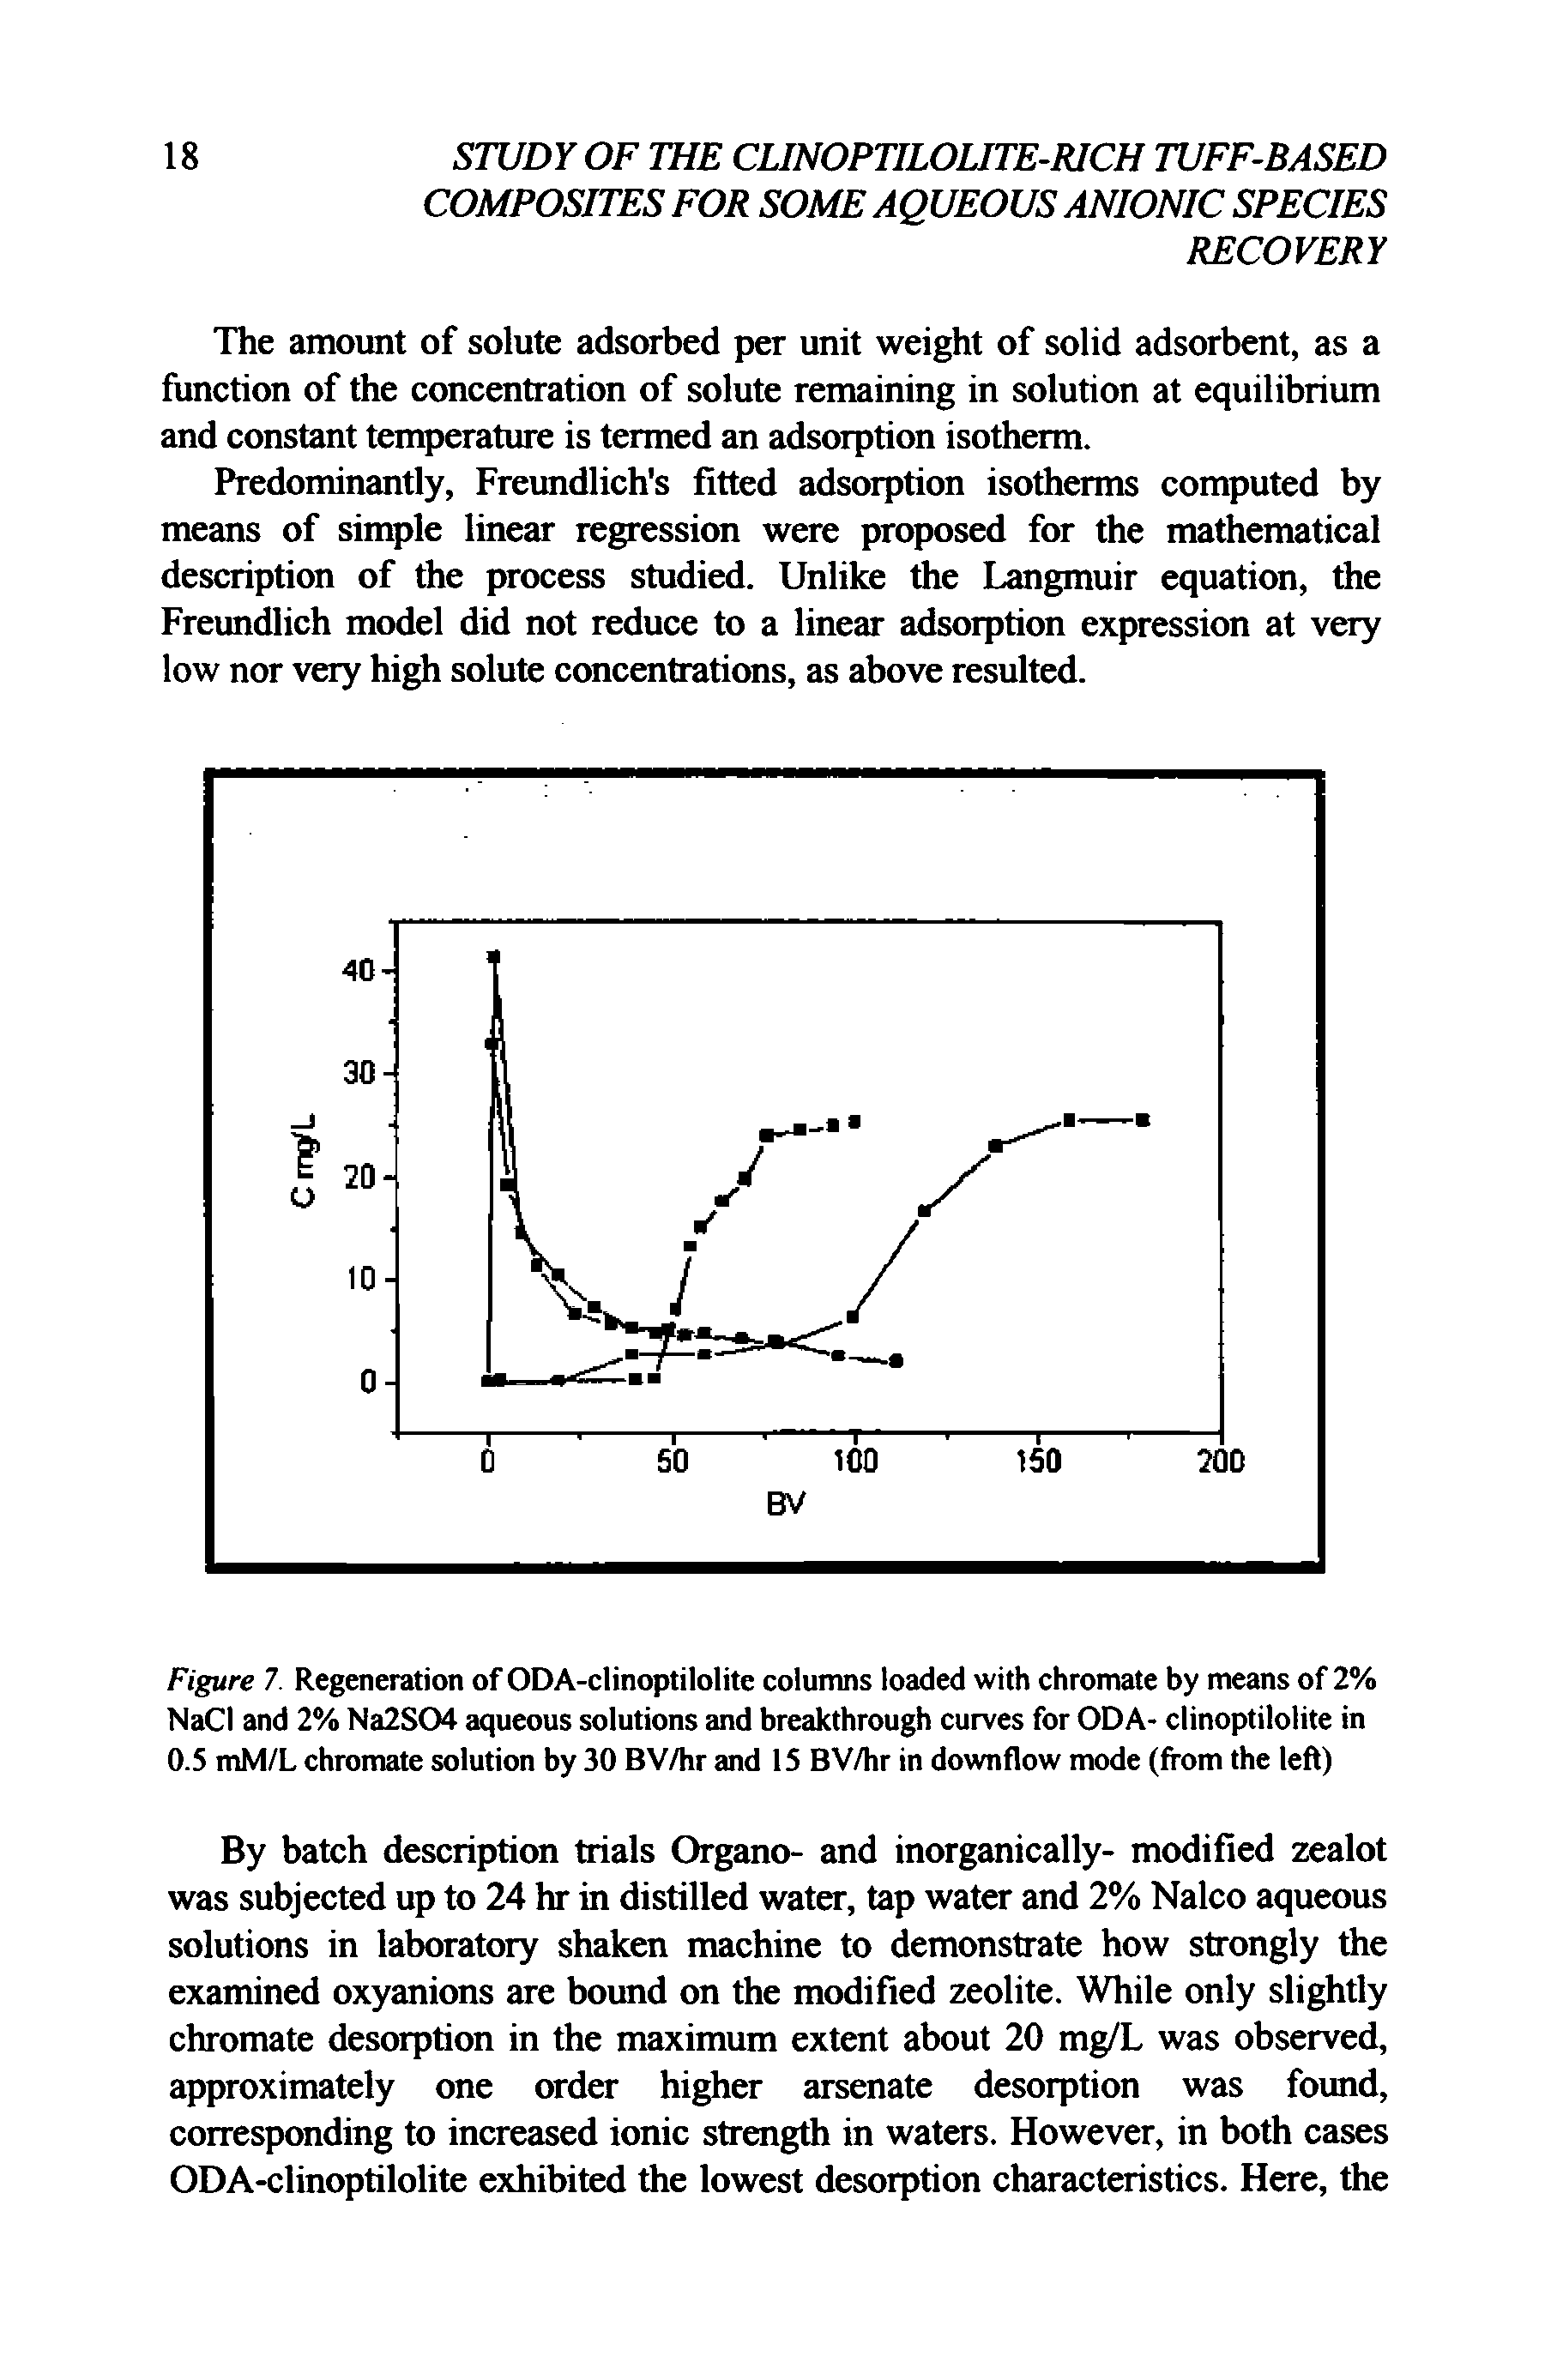 Figure 7 Regeneration of ODA-clinoptilolite columns loaded with chromate by means of 2% NaCI and 2% Na2S04 aqueous solutions and breakthrough curves for ODA- clinoptilolite in 0.5 mM/L chromate solution by 30 BV/hr and 15 BV/hr in downflow mode (from the left)...